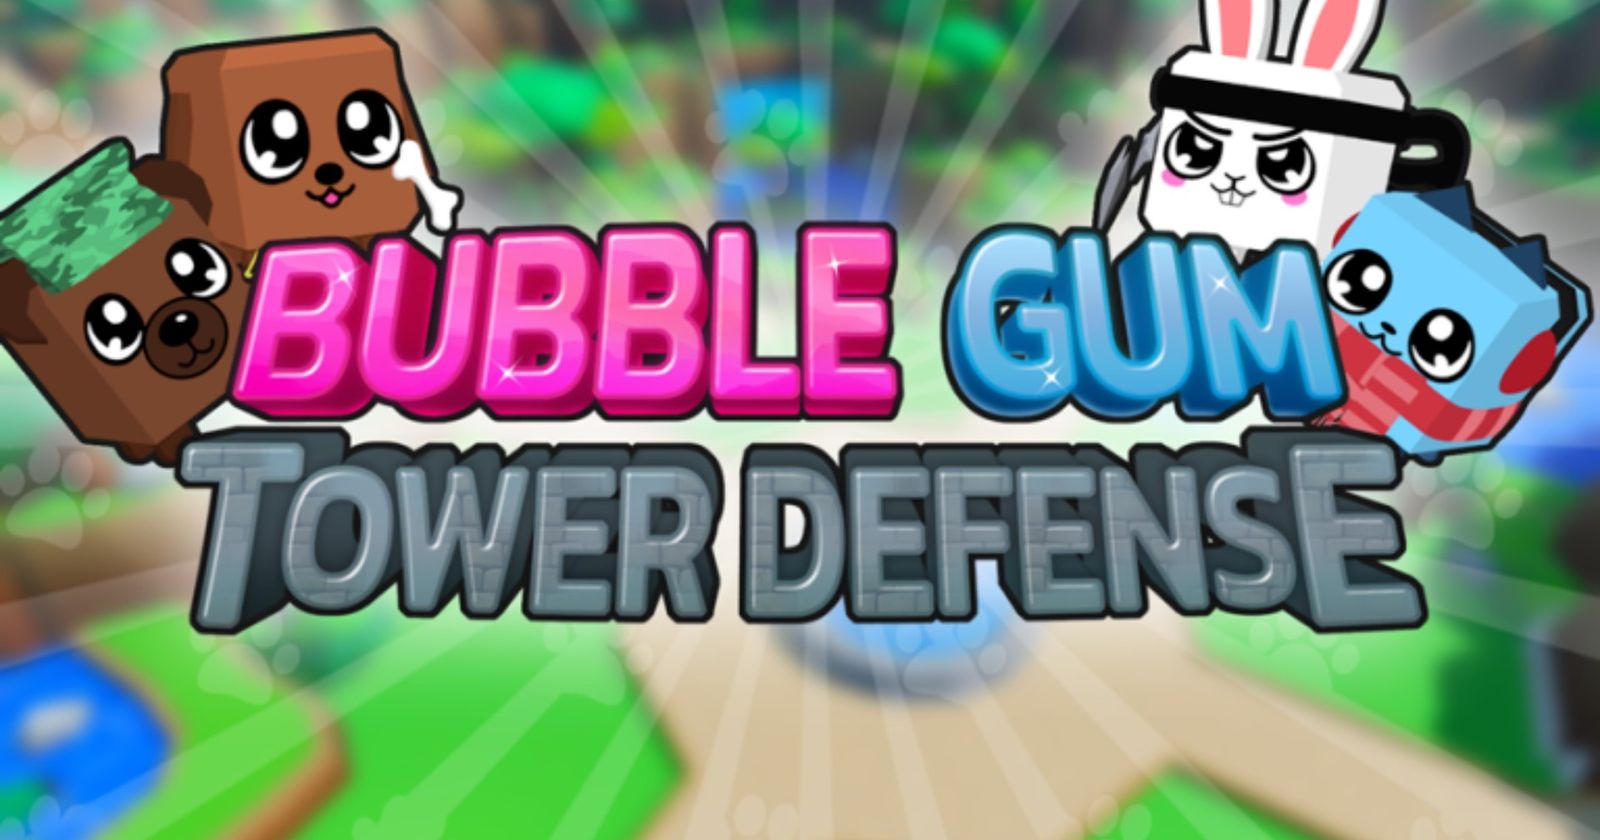 [2 NEW CODES] ALL CODES IN ALL STAR TOWER DEFENSE ROBLOX [over 1500 gems!]  [UPDATED] 